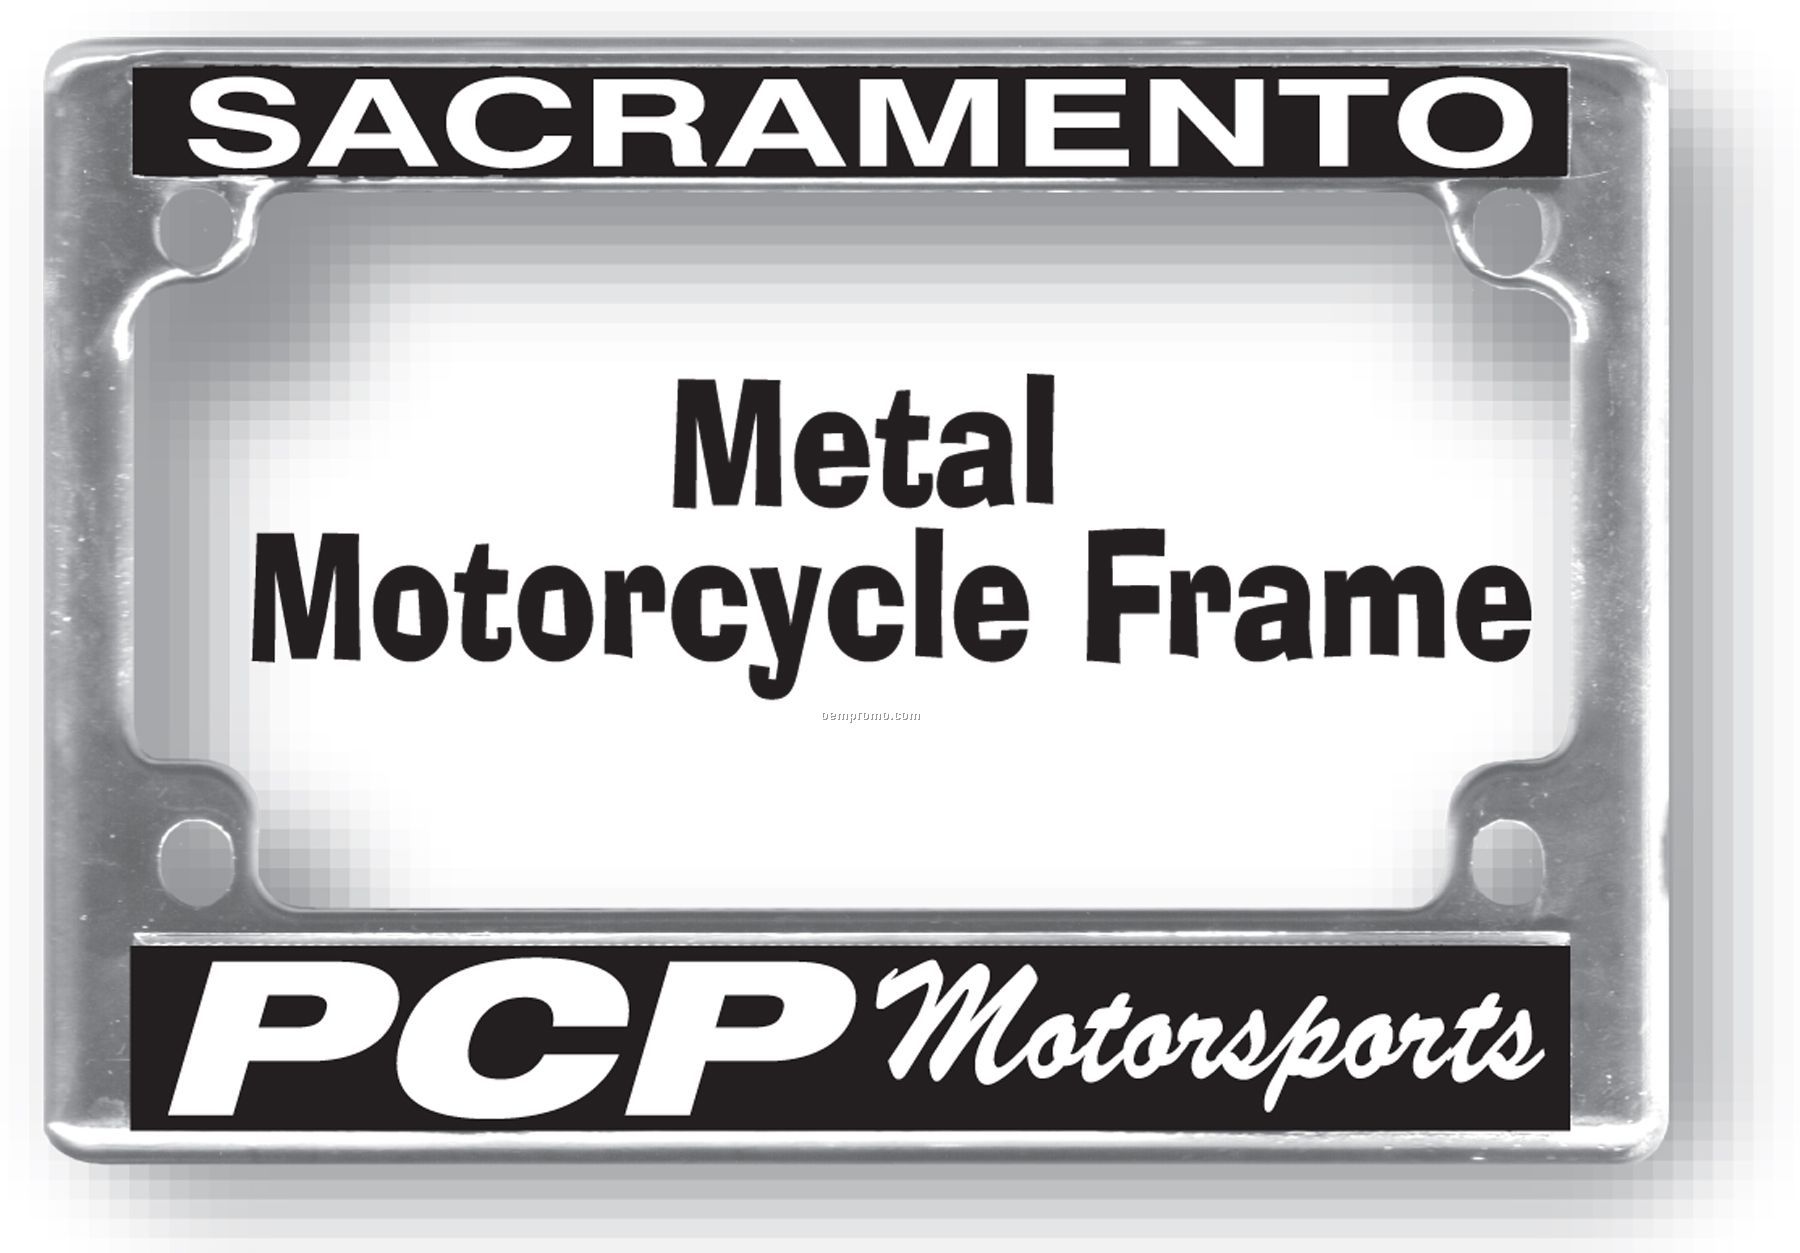 Standard Chrome Motorcycle License Plate Frame